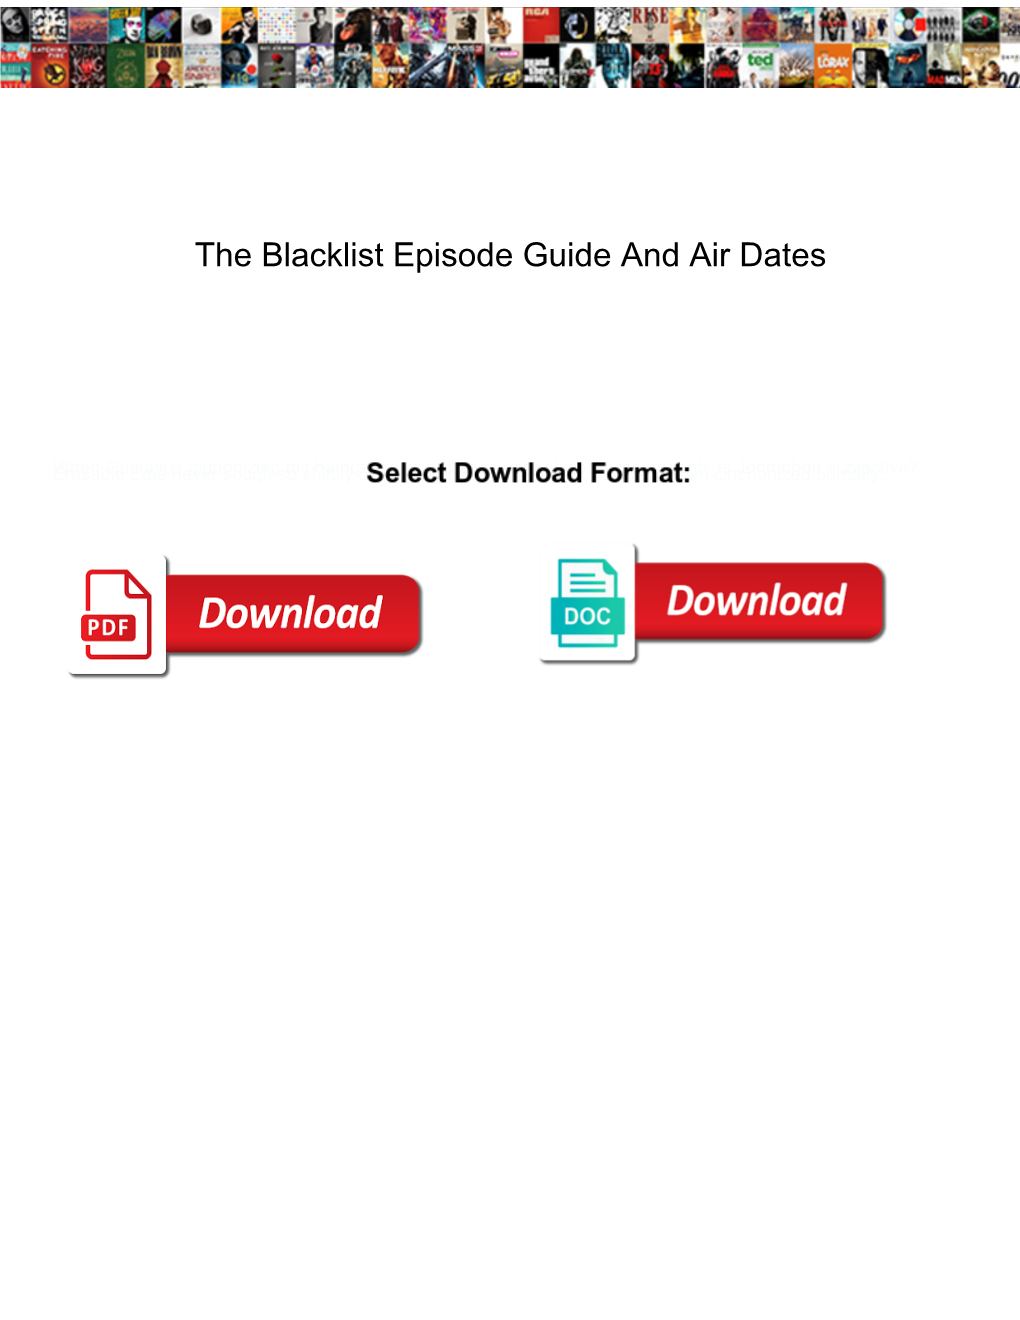 The Blacklist Episode Guide and Air Dates